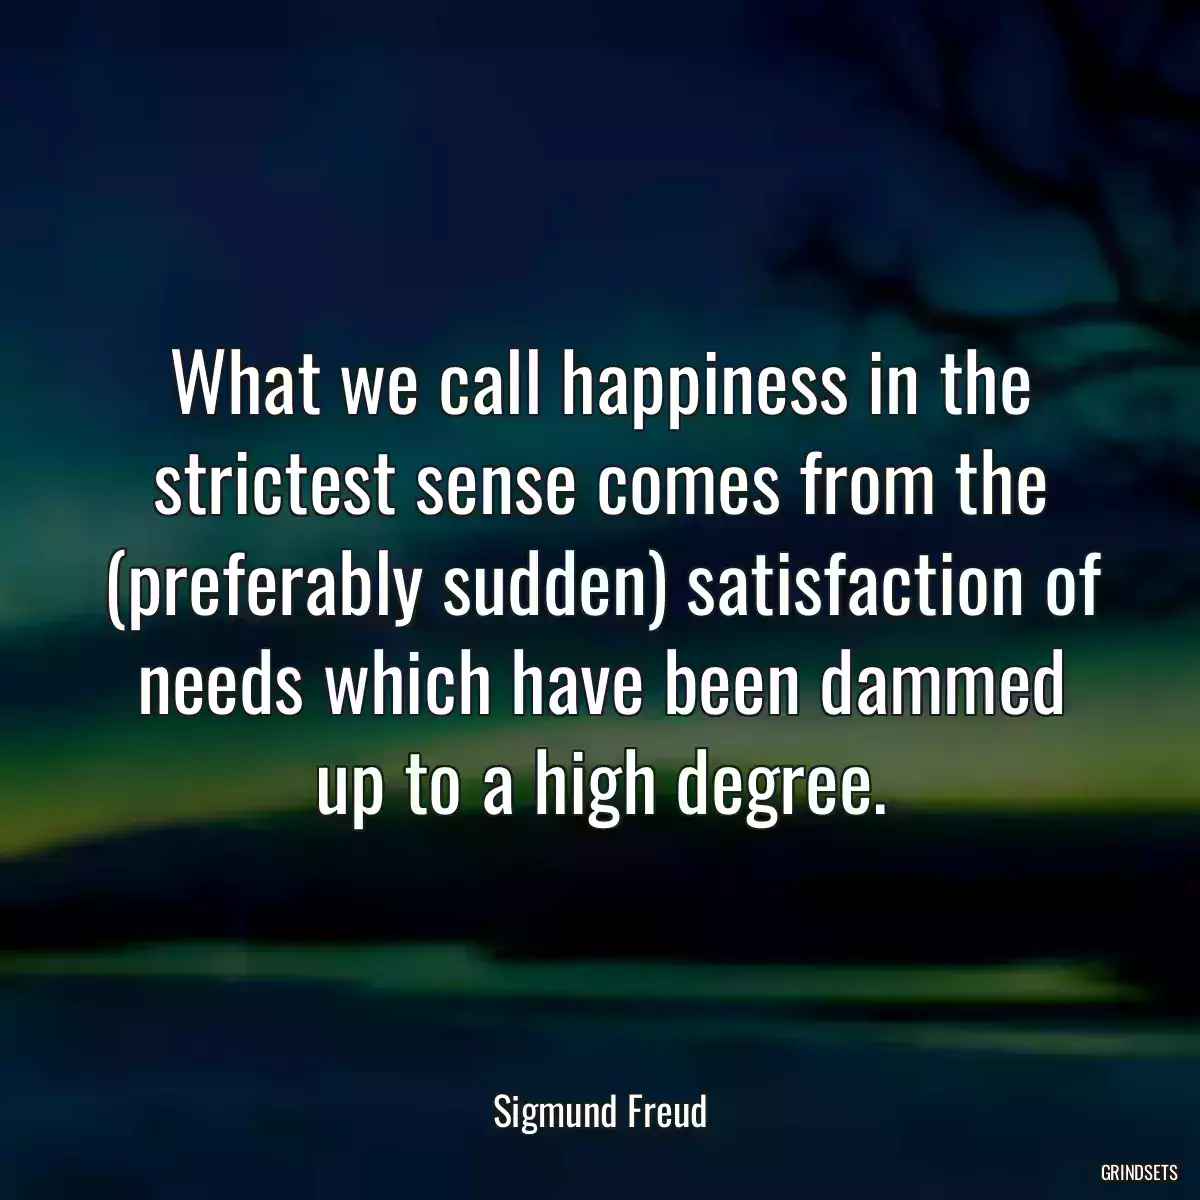 What we call happiness in the strictest sense comes from the (preferably sudden) satisfaction of needs which have been dammed up to a high degree.